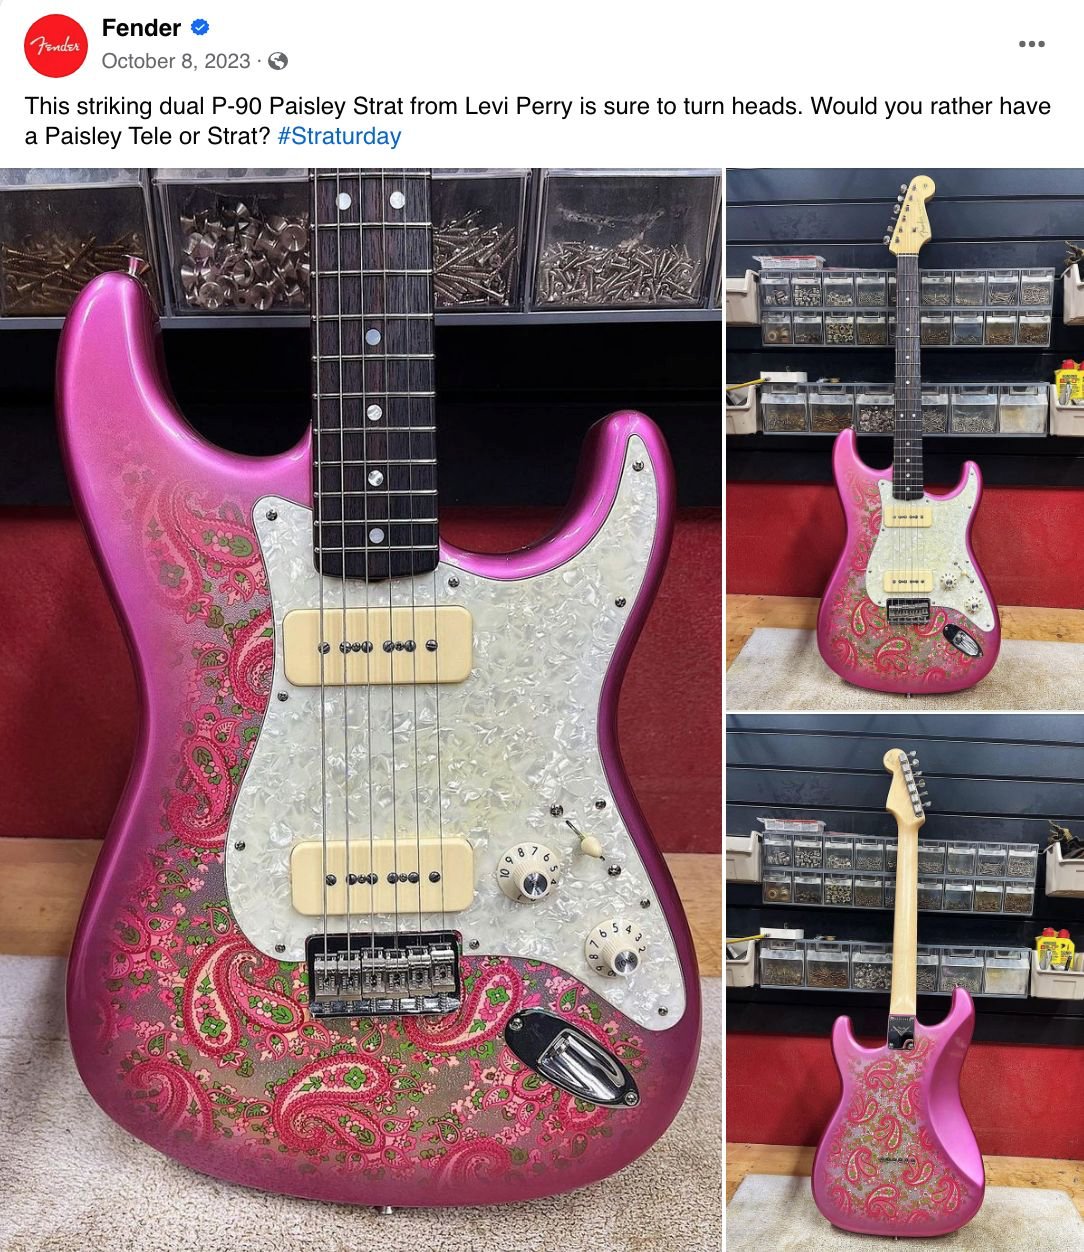 Fender's guitar Facebook post with #Straturday hashtag